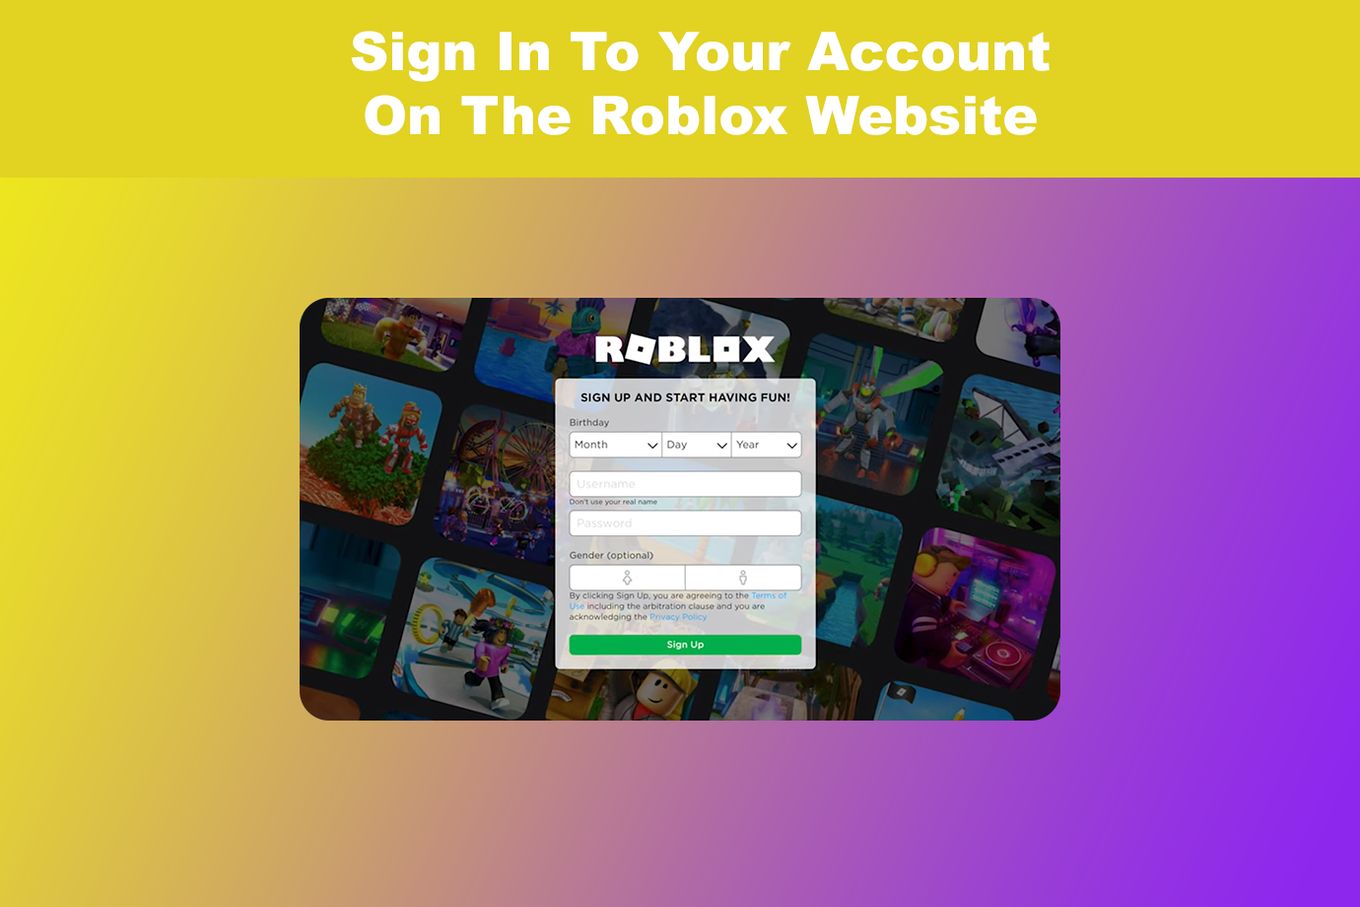 ROBLOX Website and How to Sign Up